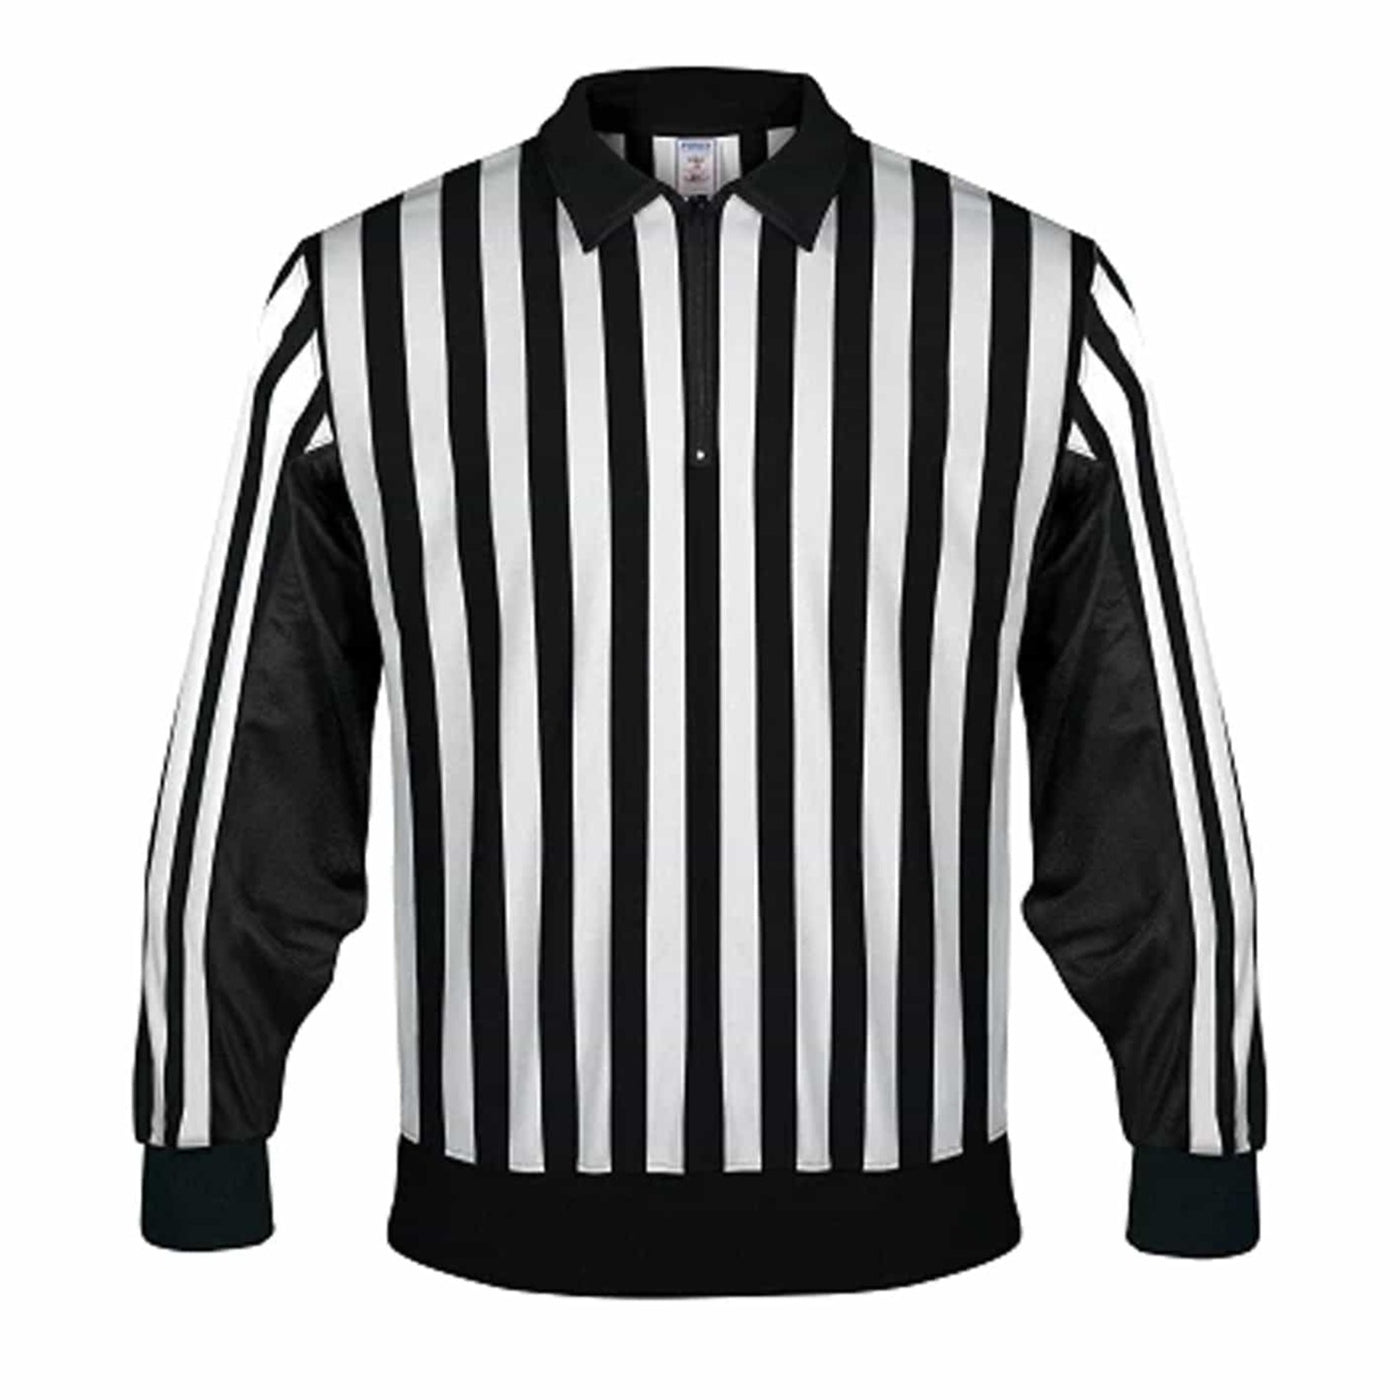 Force Elite Hockey Linesman Jersey - The Hockey Shop Source For Sports